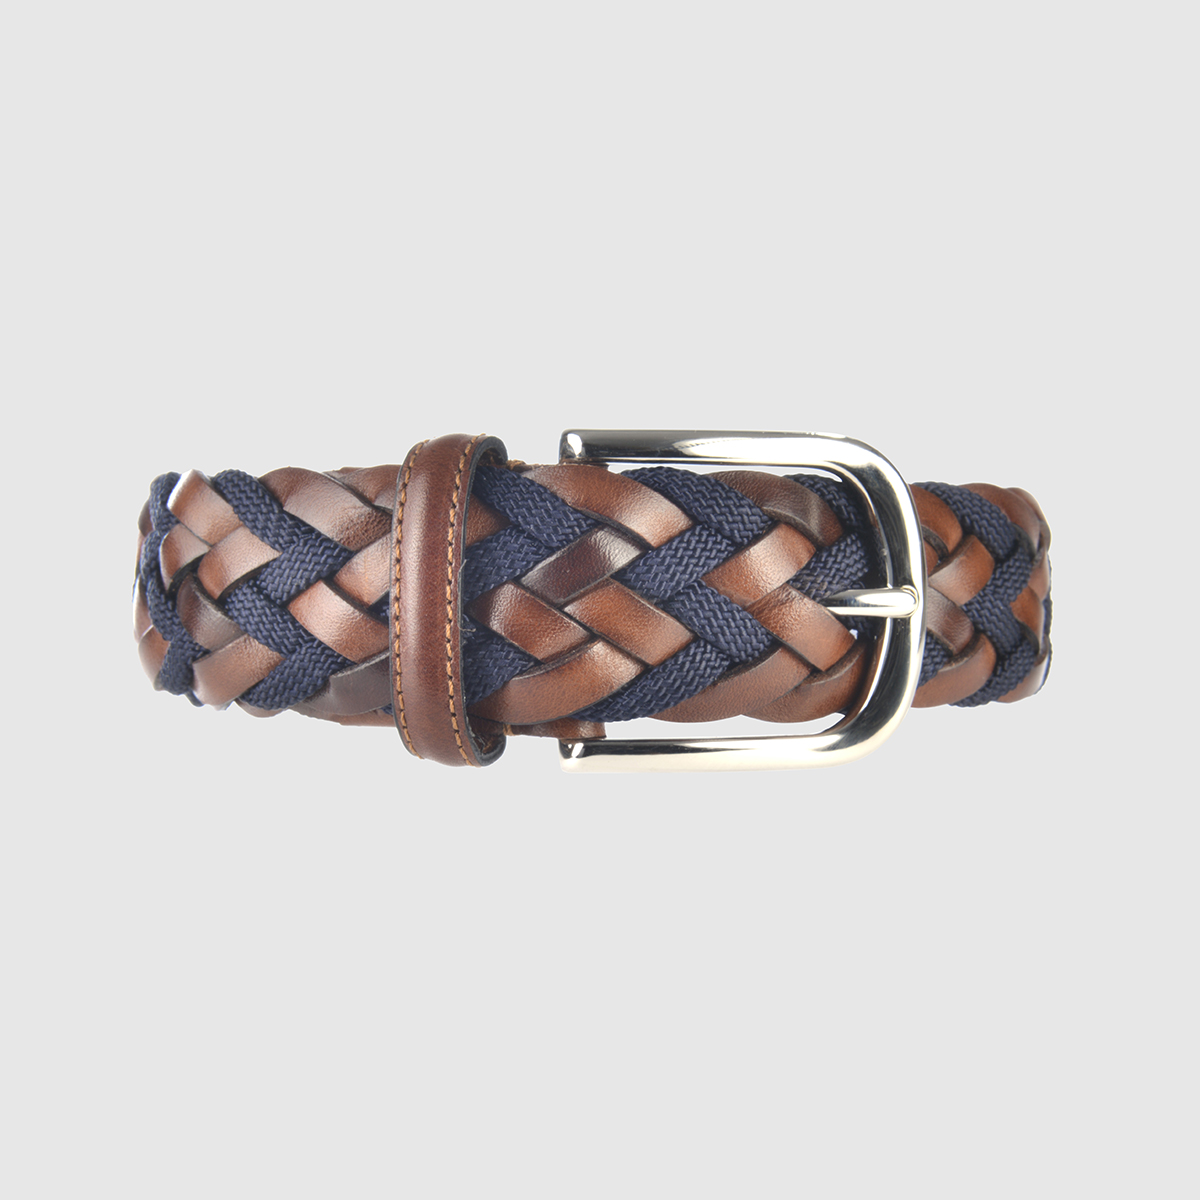 Cognac/Navy Athison Divergence Braided Leather Belt – XS-S